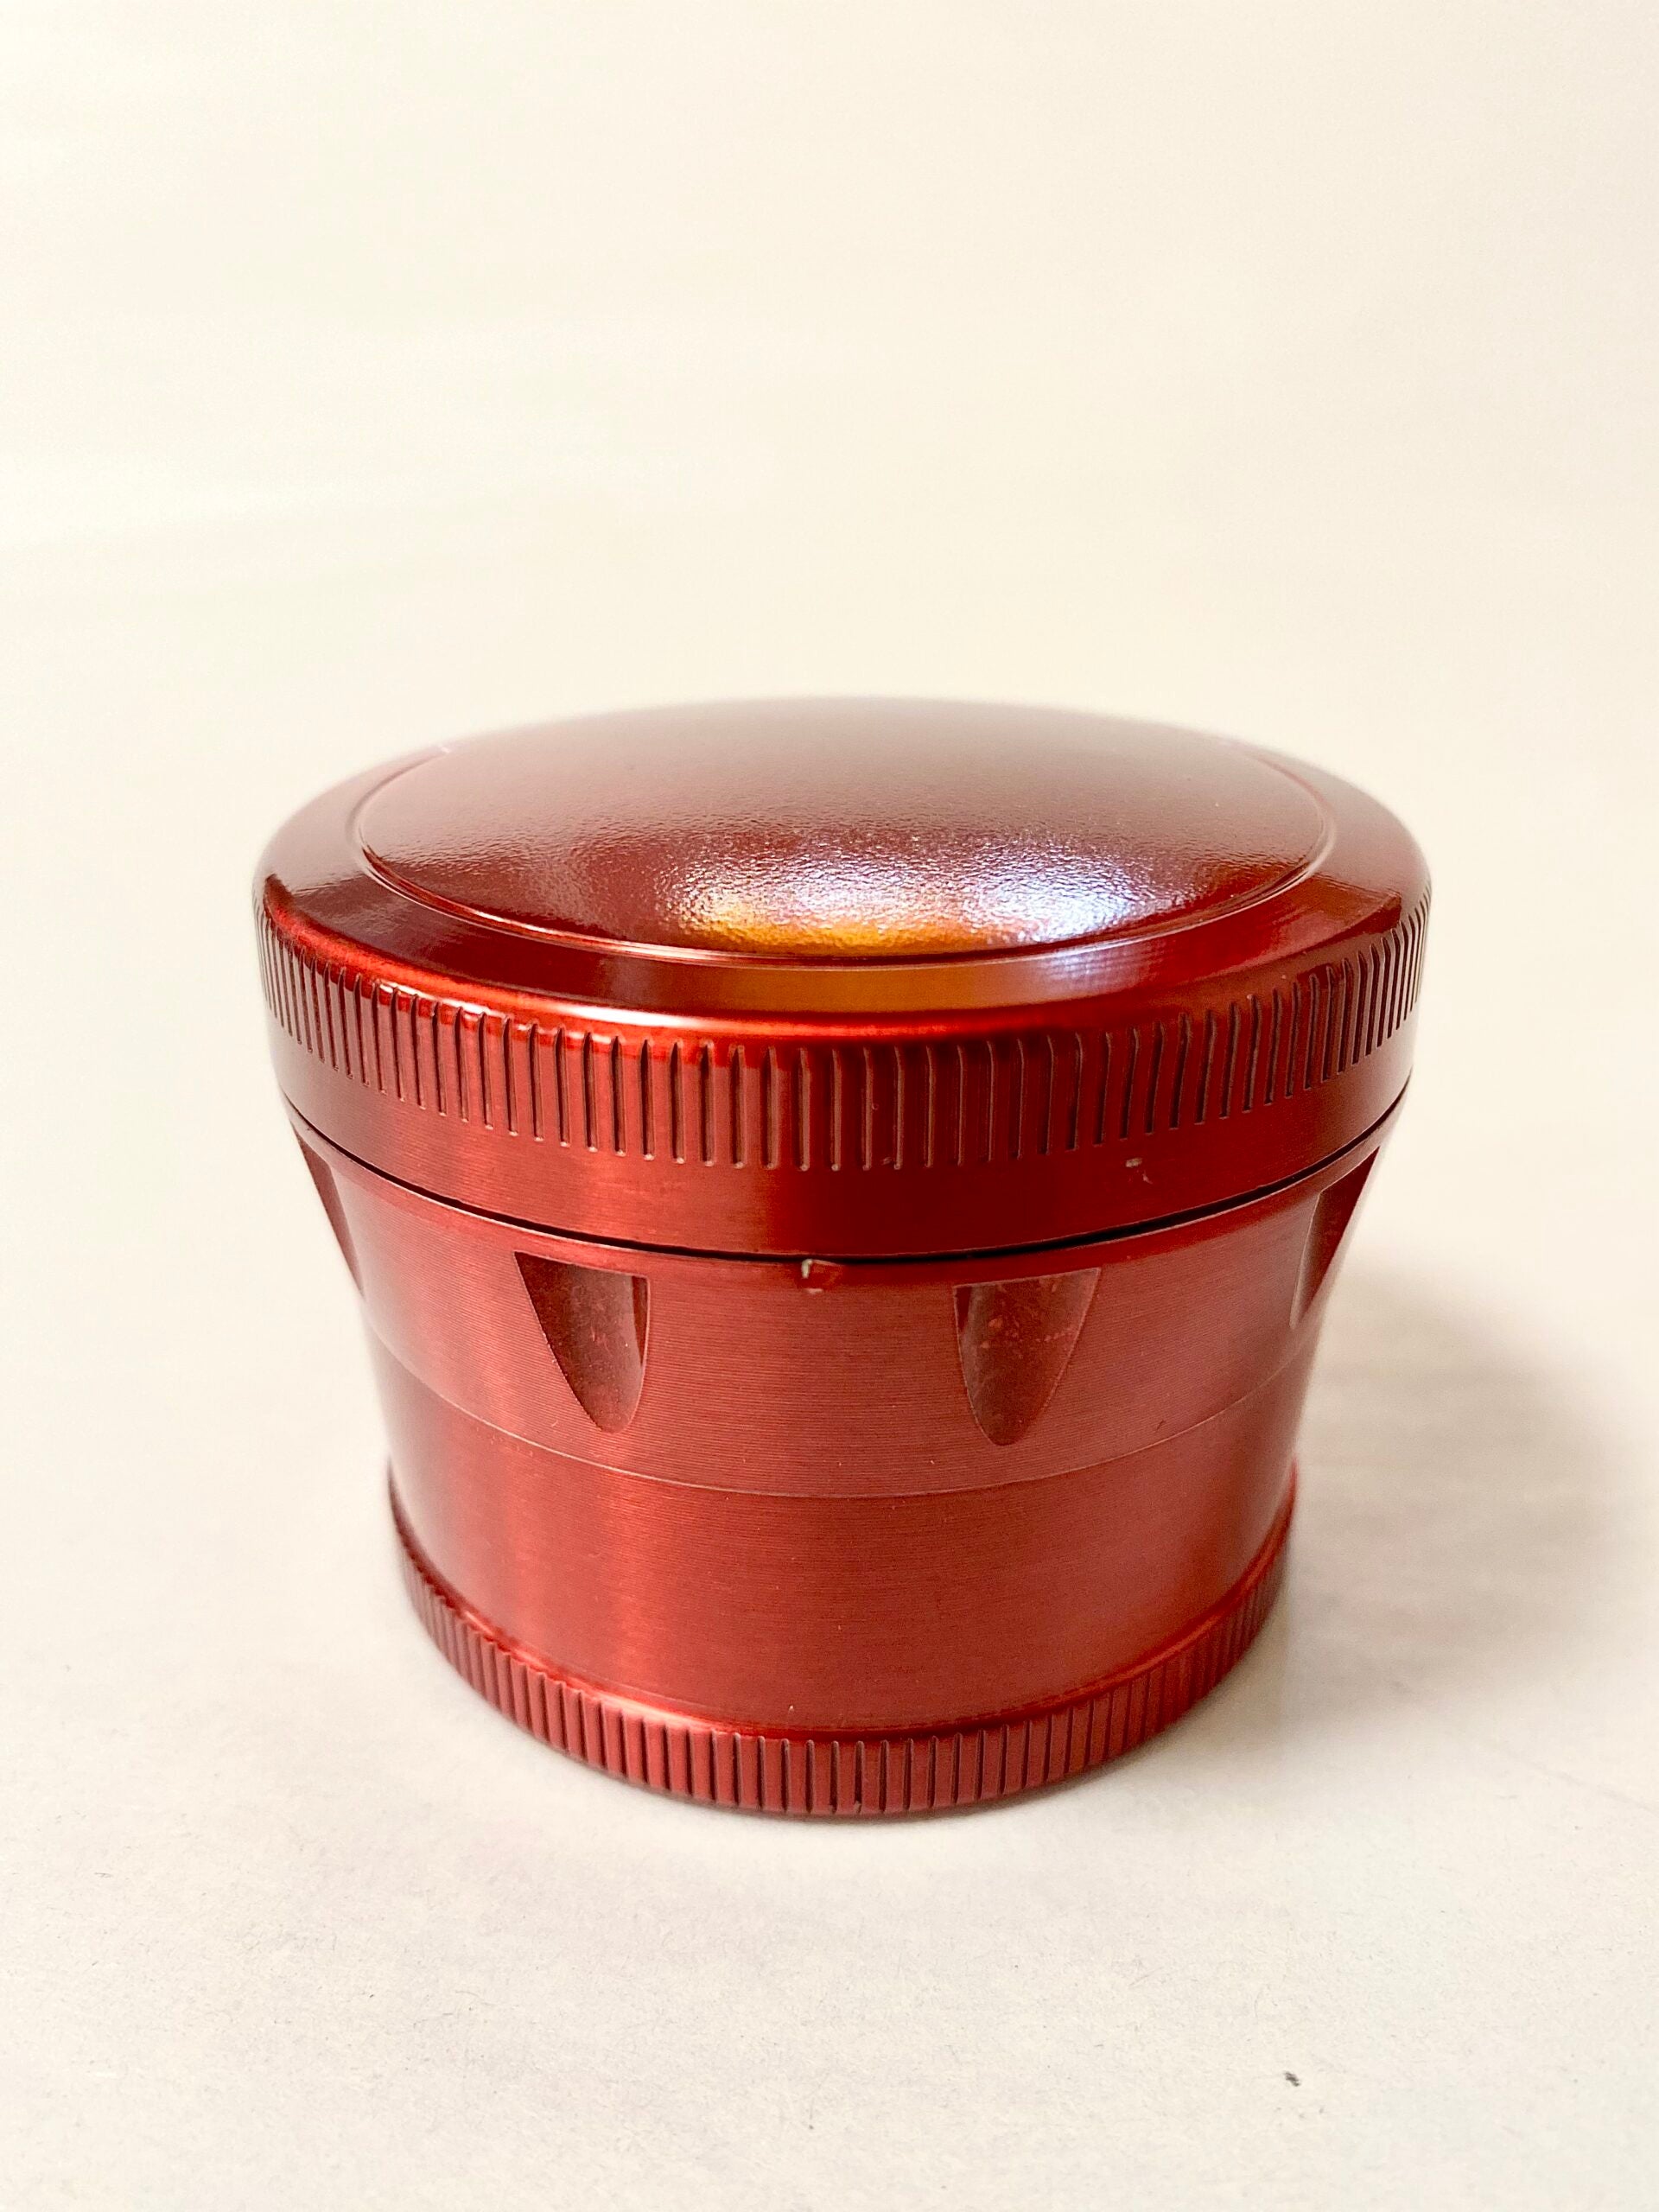 Grinder - Gloss Red Classic Finish - 4 piece